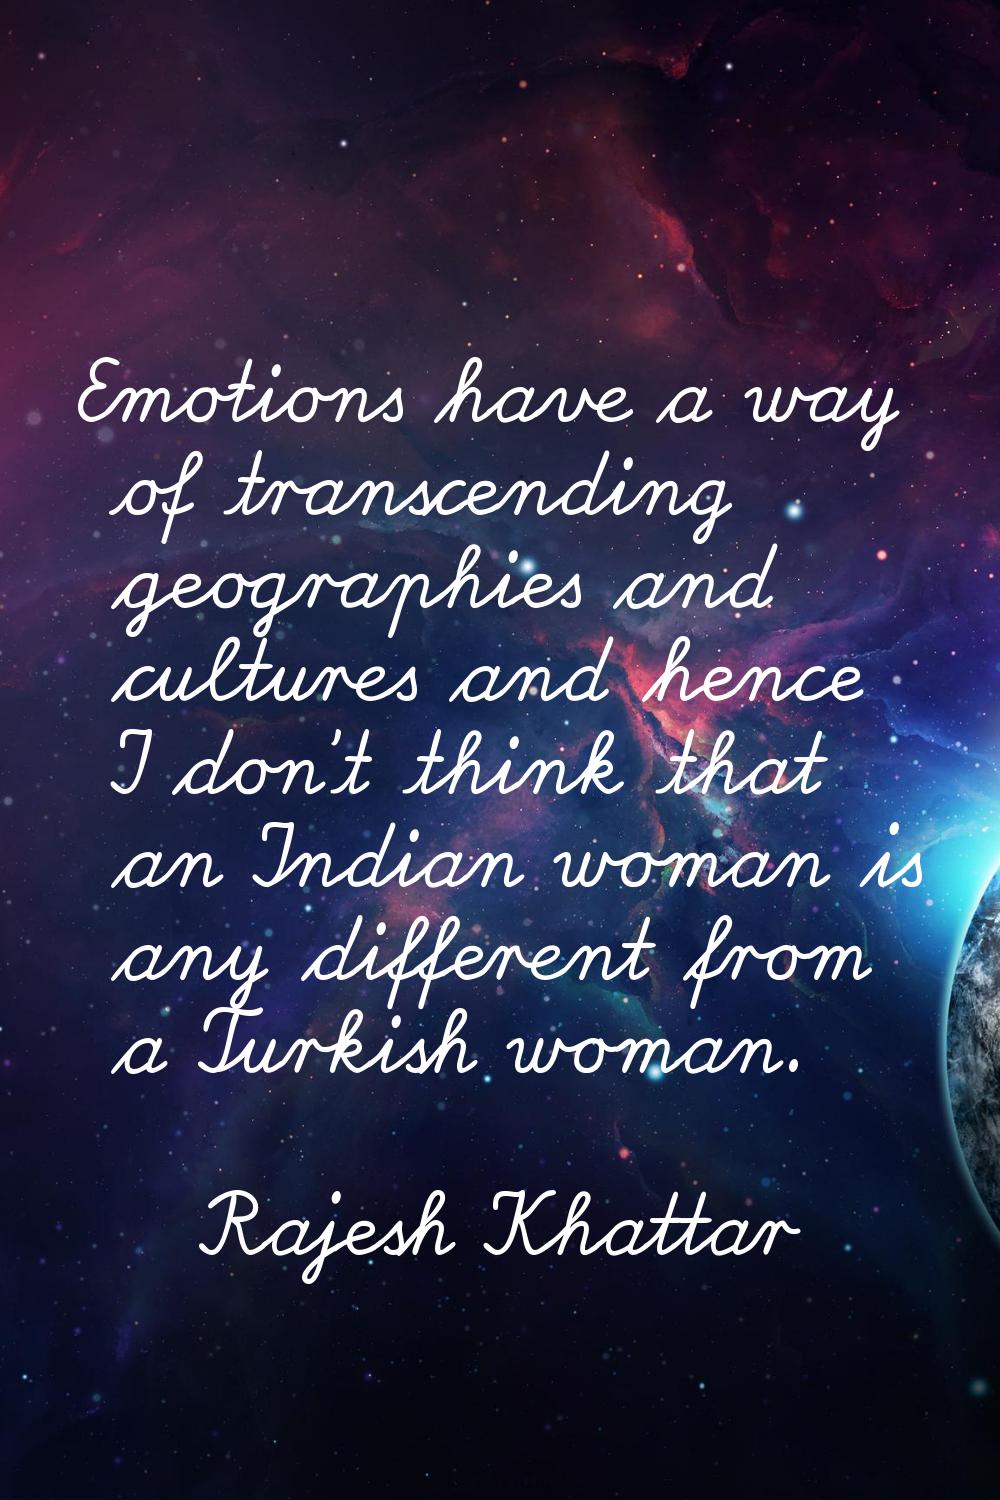 Emotions have a way of transcending geographies and cultures and hence I don't think that an Indian